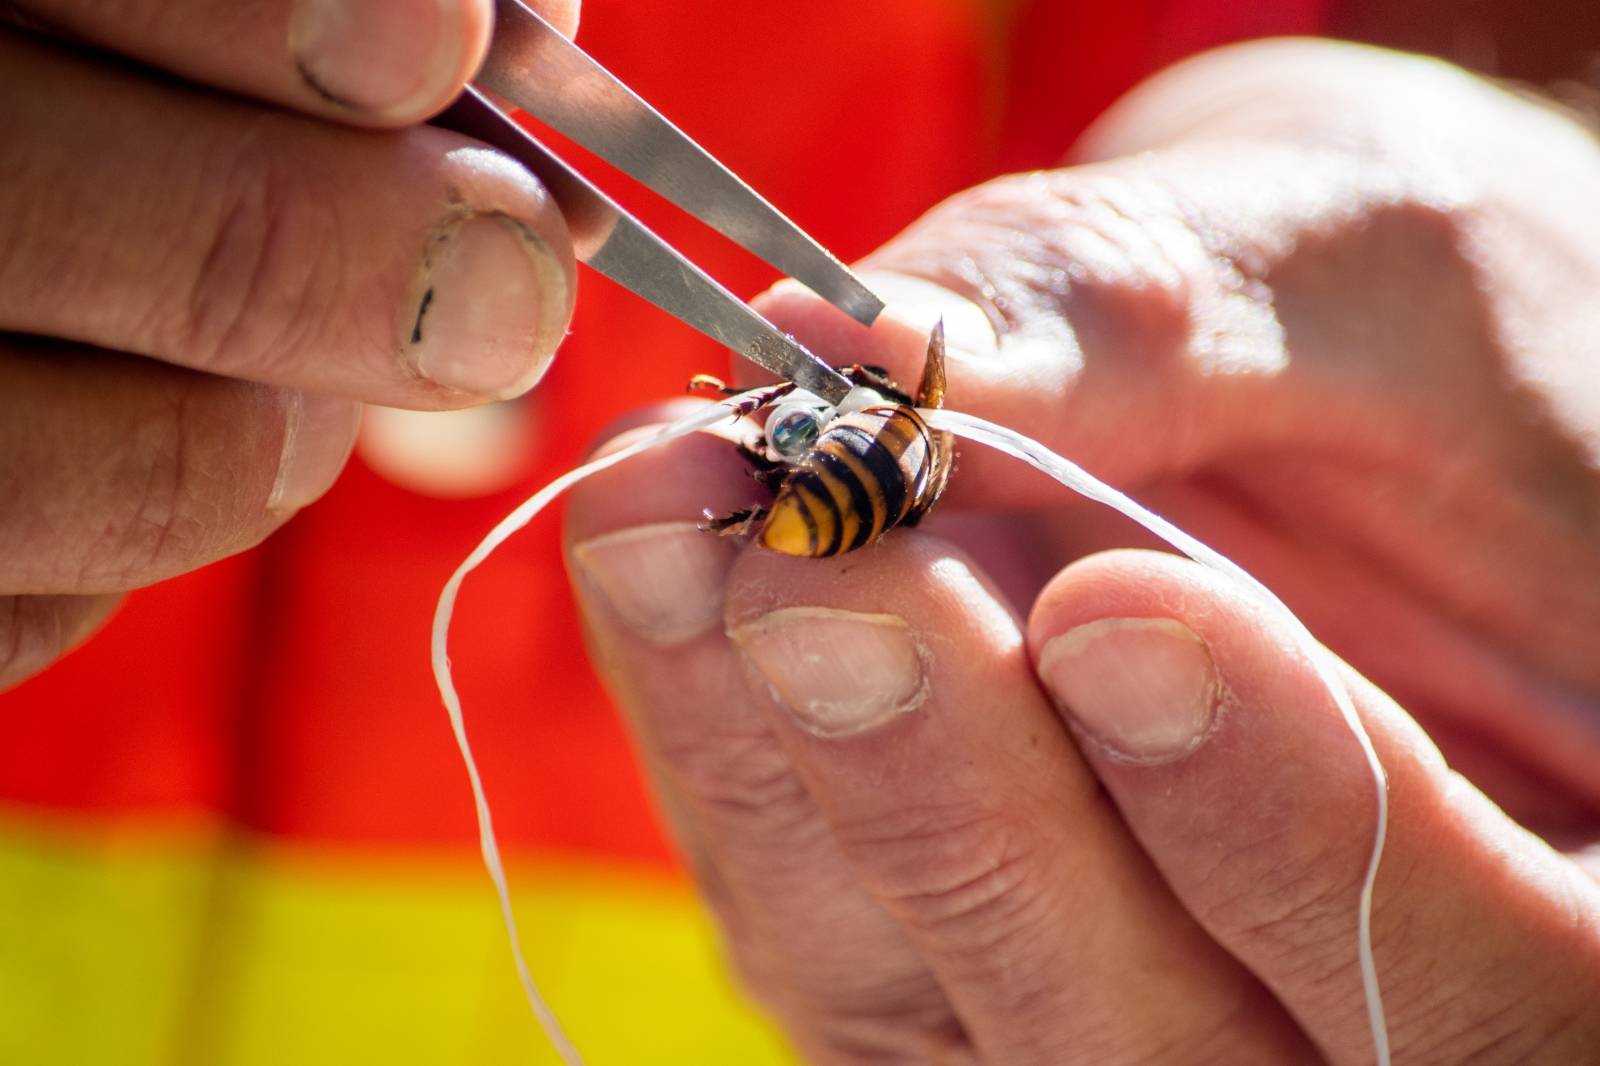 A radio tracking device is fitted by Washington State Department of Agriculture (WSDA) entomologists on an Asian giant hornet near Blaine